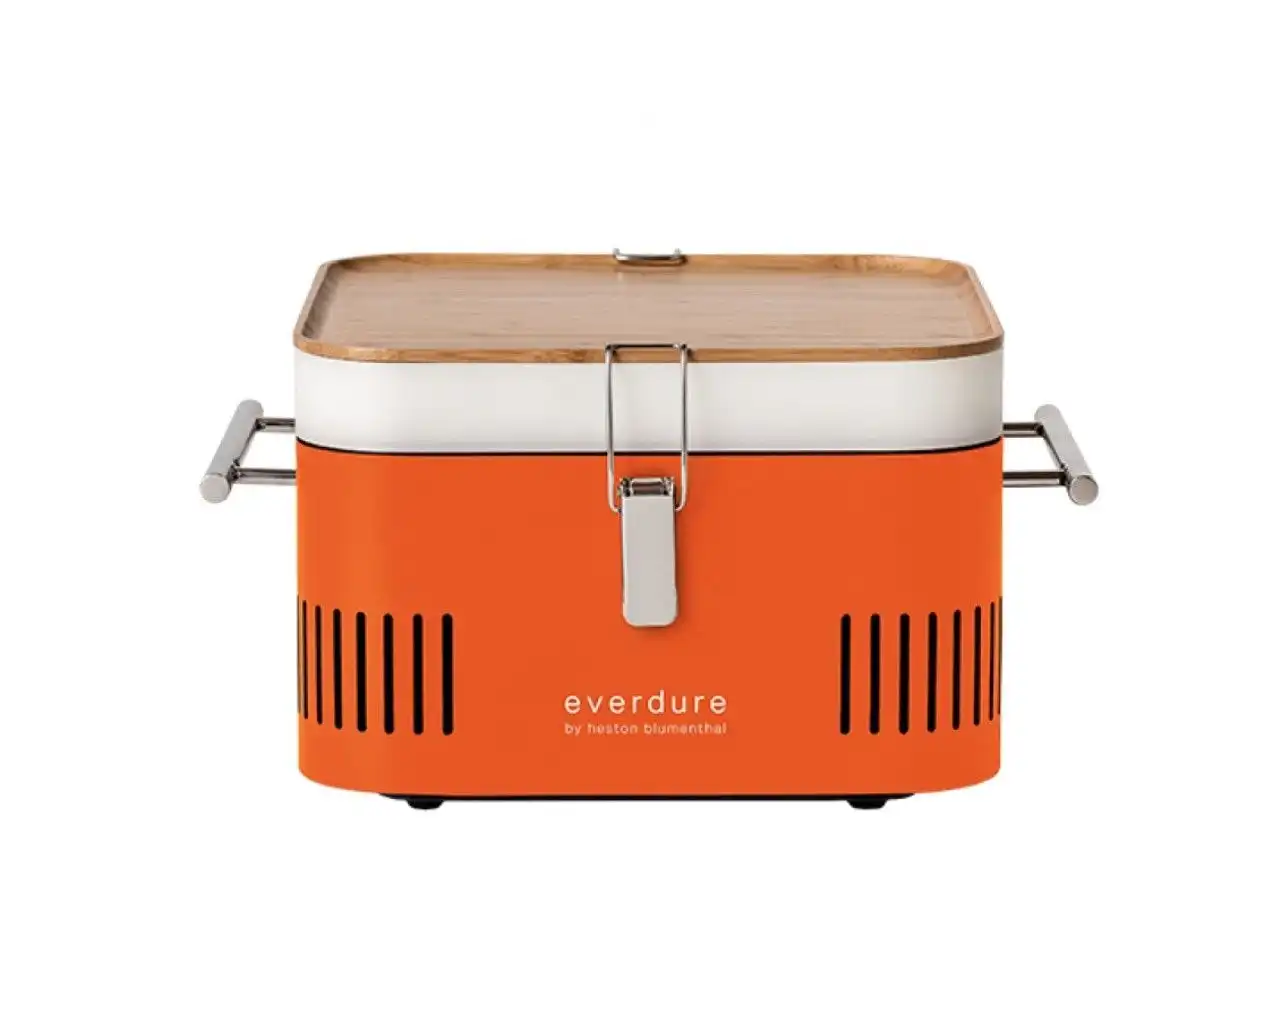 Everdure by Heston Blumenthal CUBE Charcoal Portable Barbeque - Orange